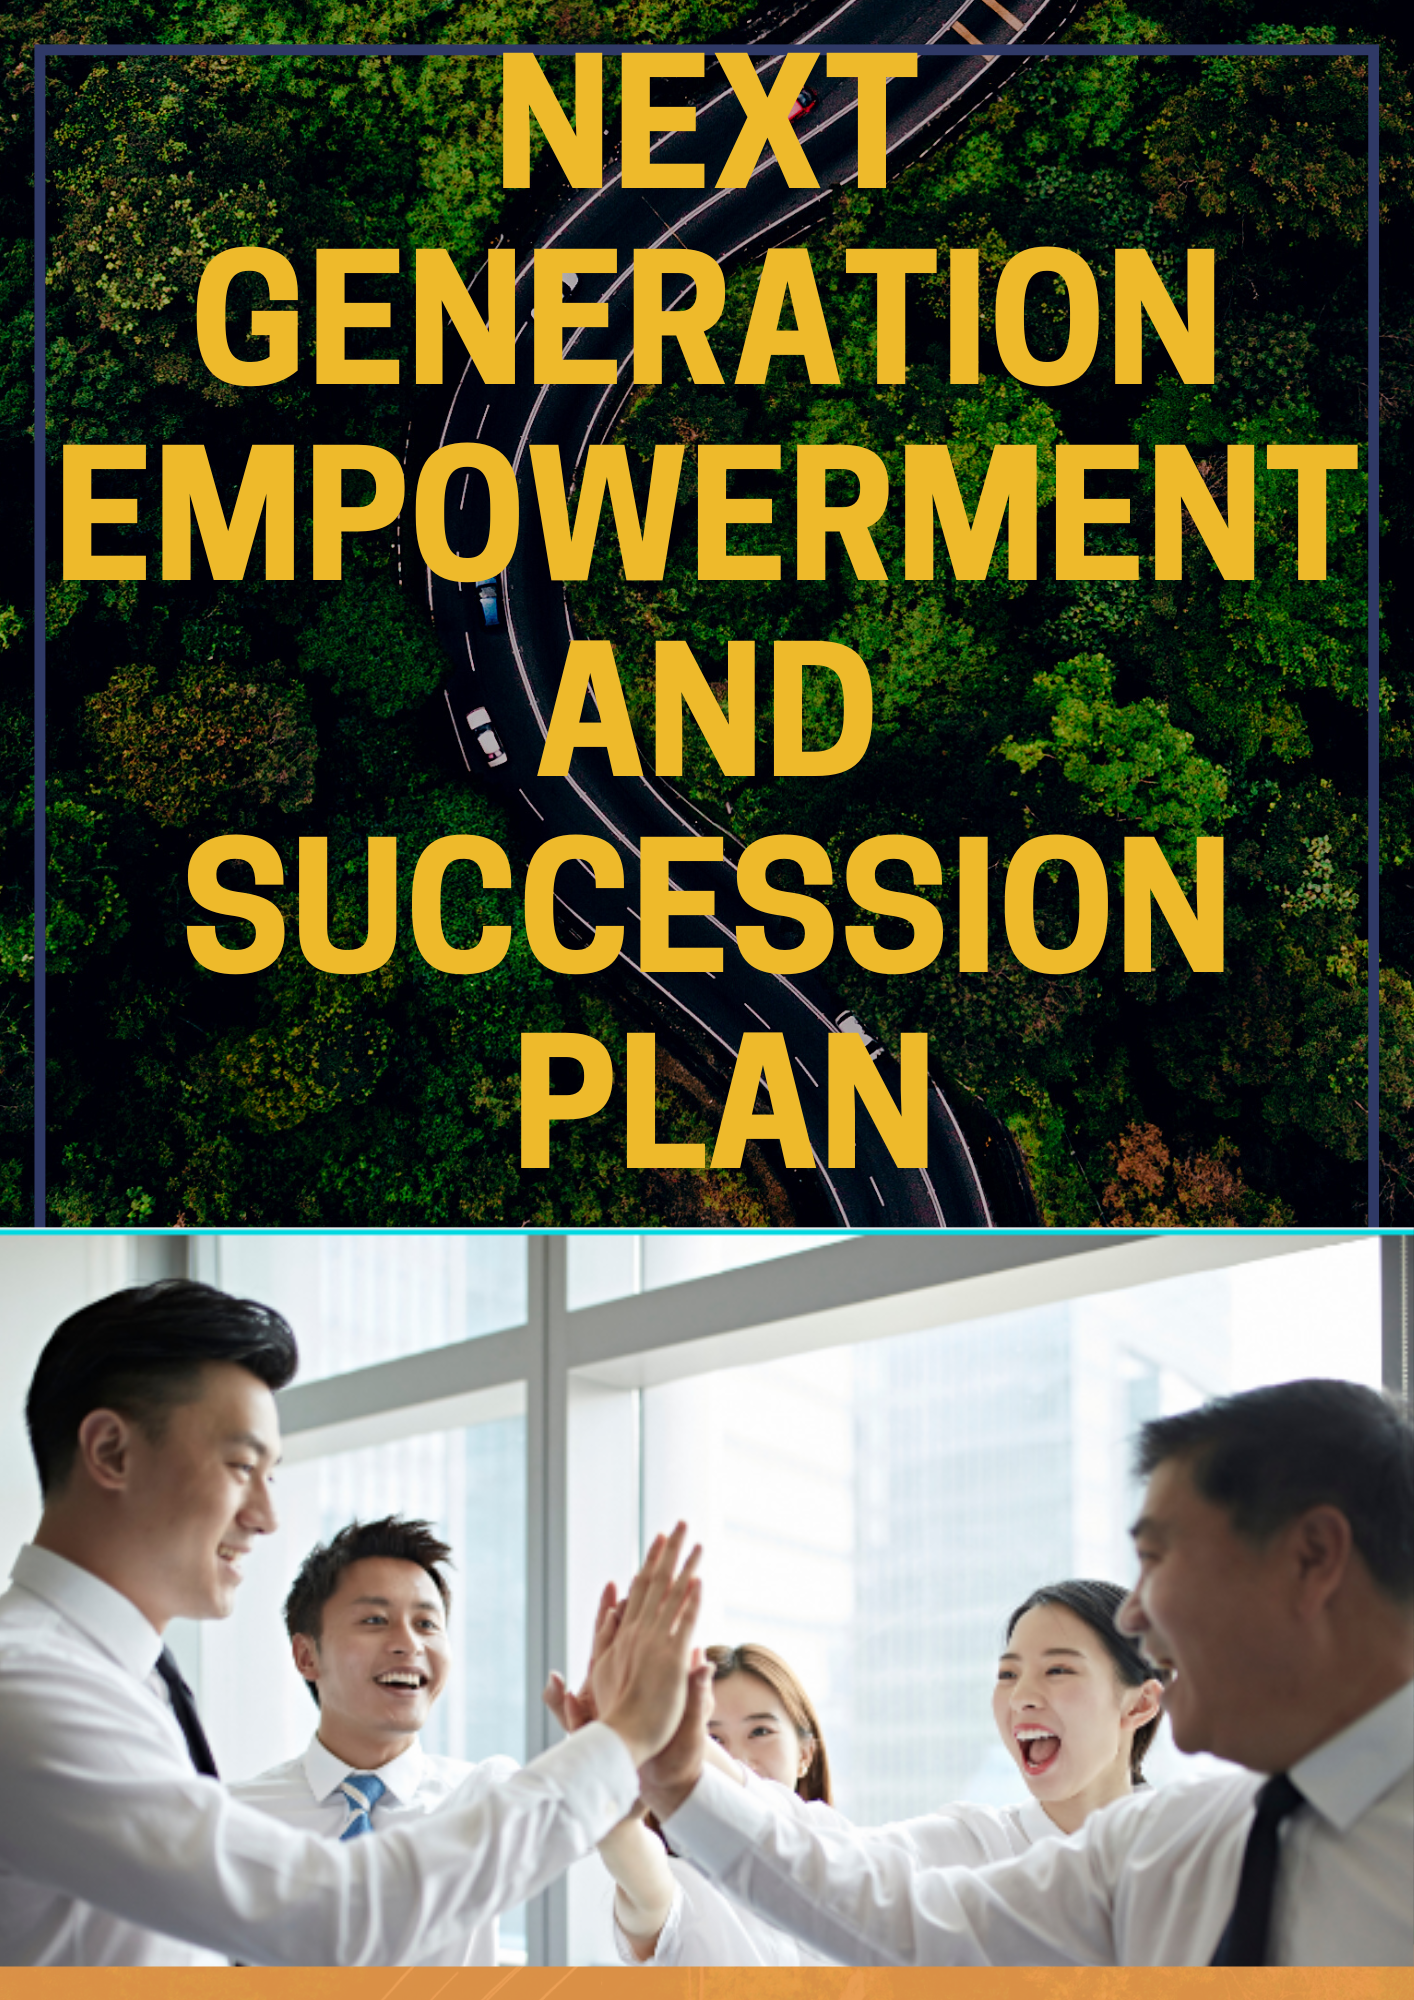 Next Generation Empowerment and Succession Plan by FrankieKnowledge